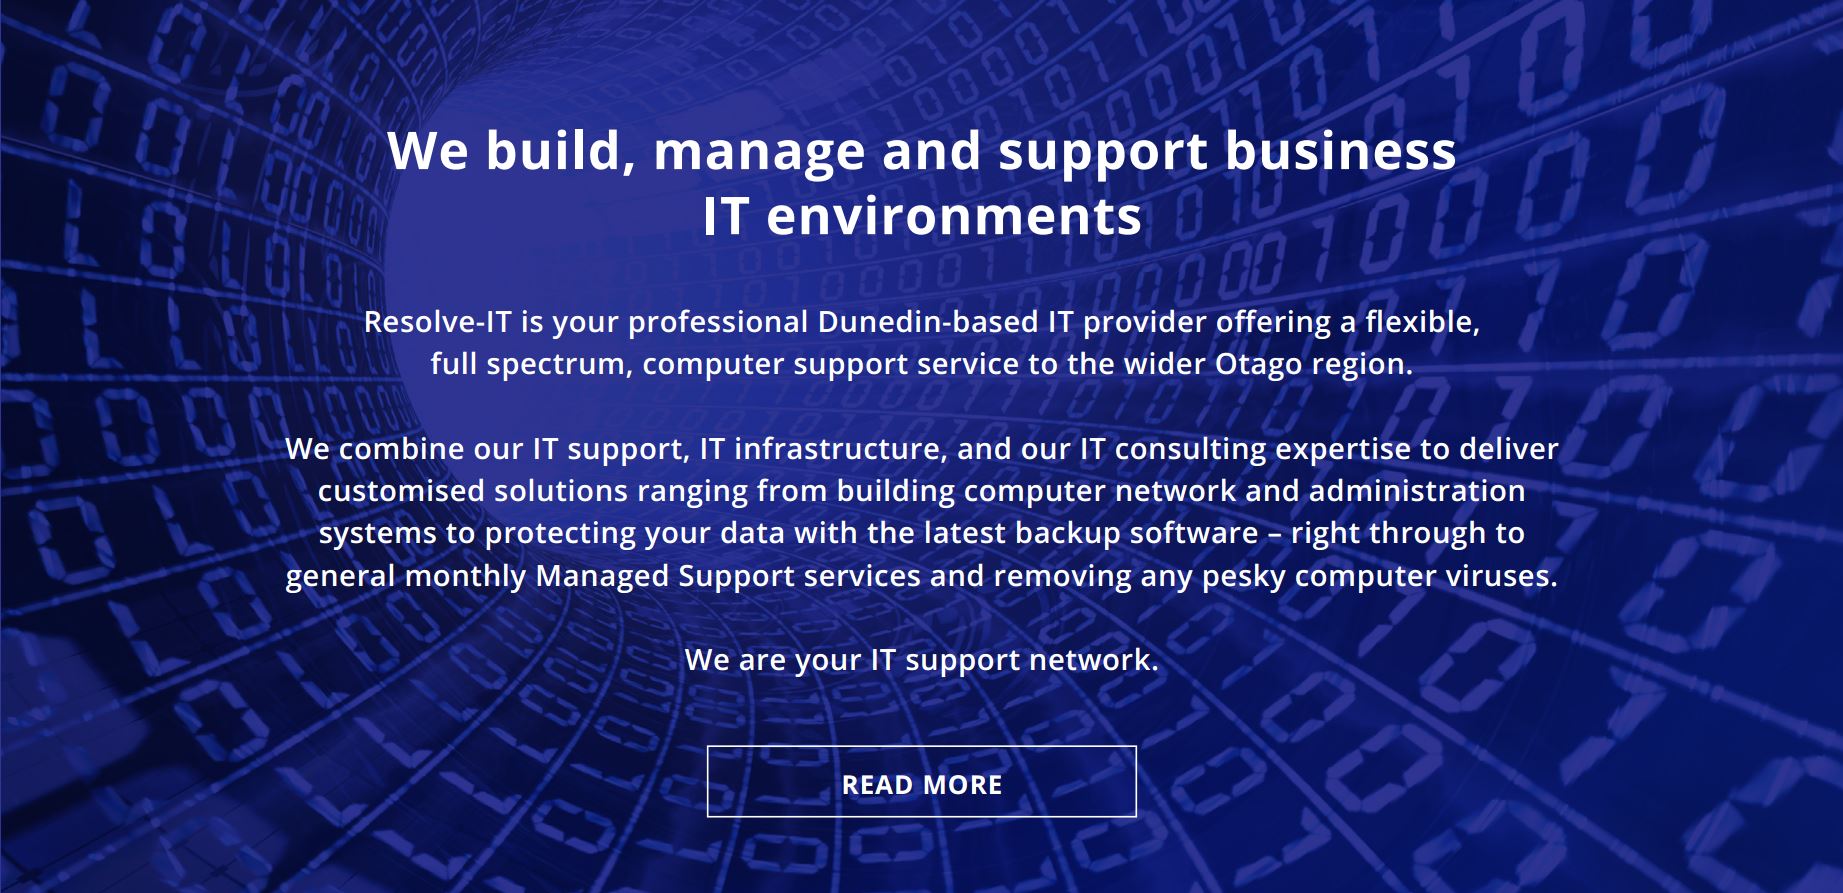 Resolve-IT -We build, manage and support business